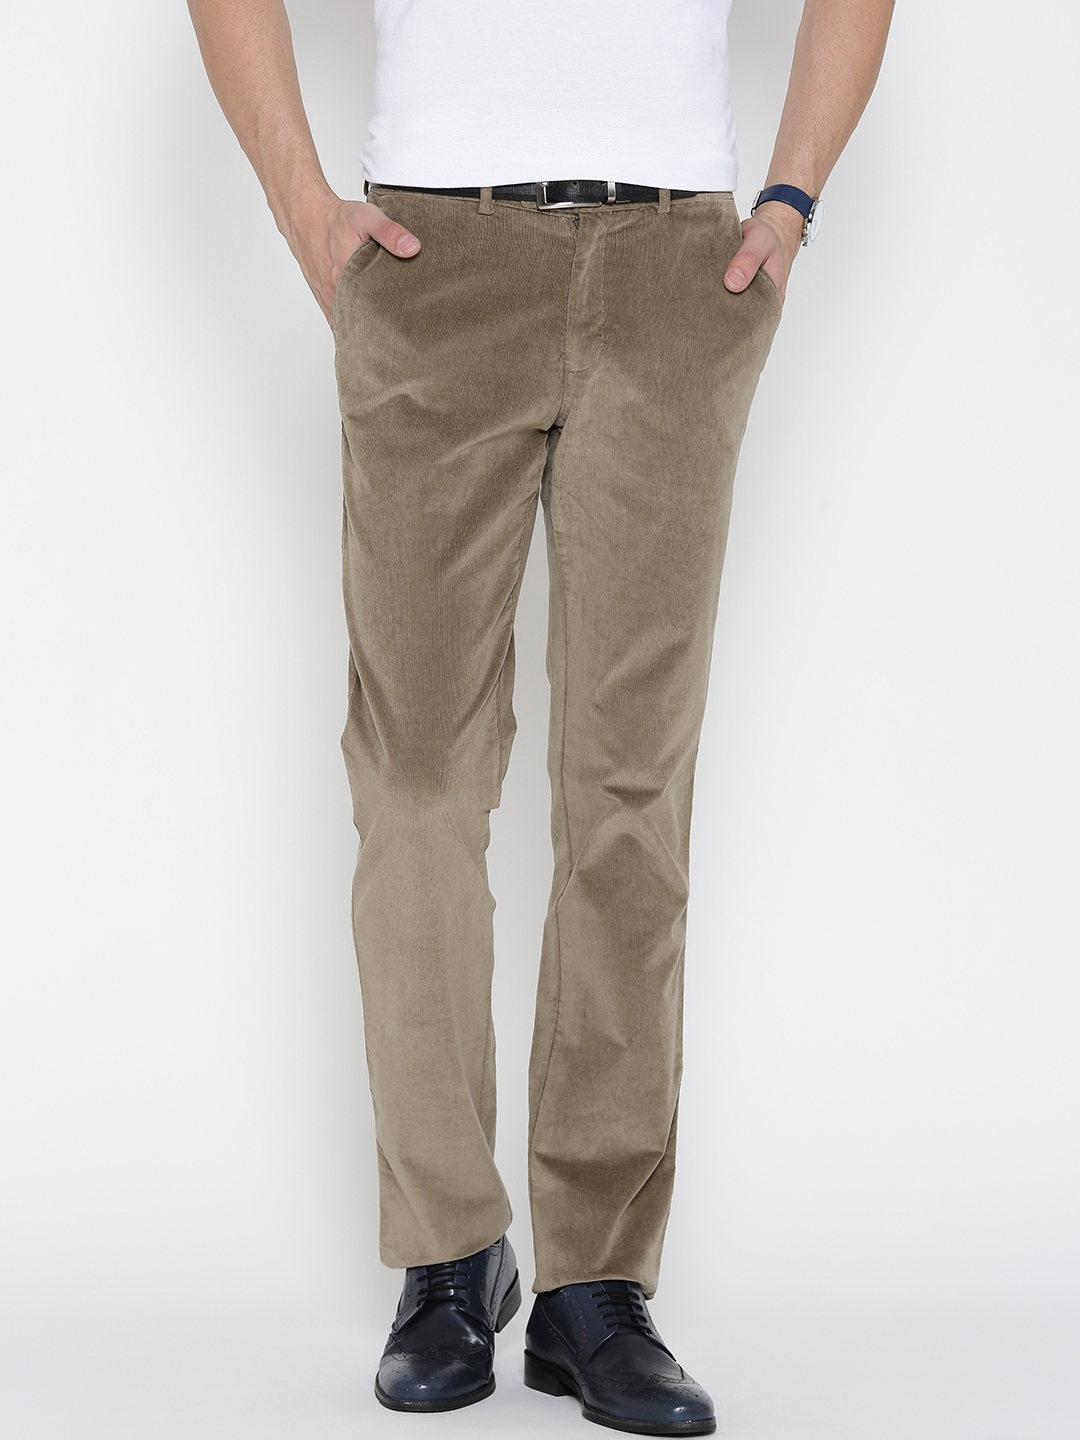 Parx Casual Trousers  Buy Parx Light Fawn Trousers Online  Nykaa Fashion